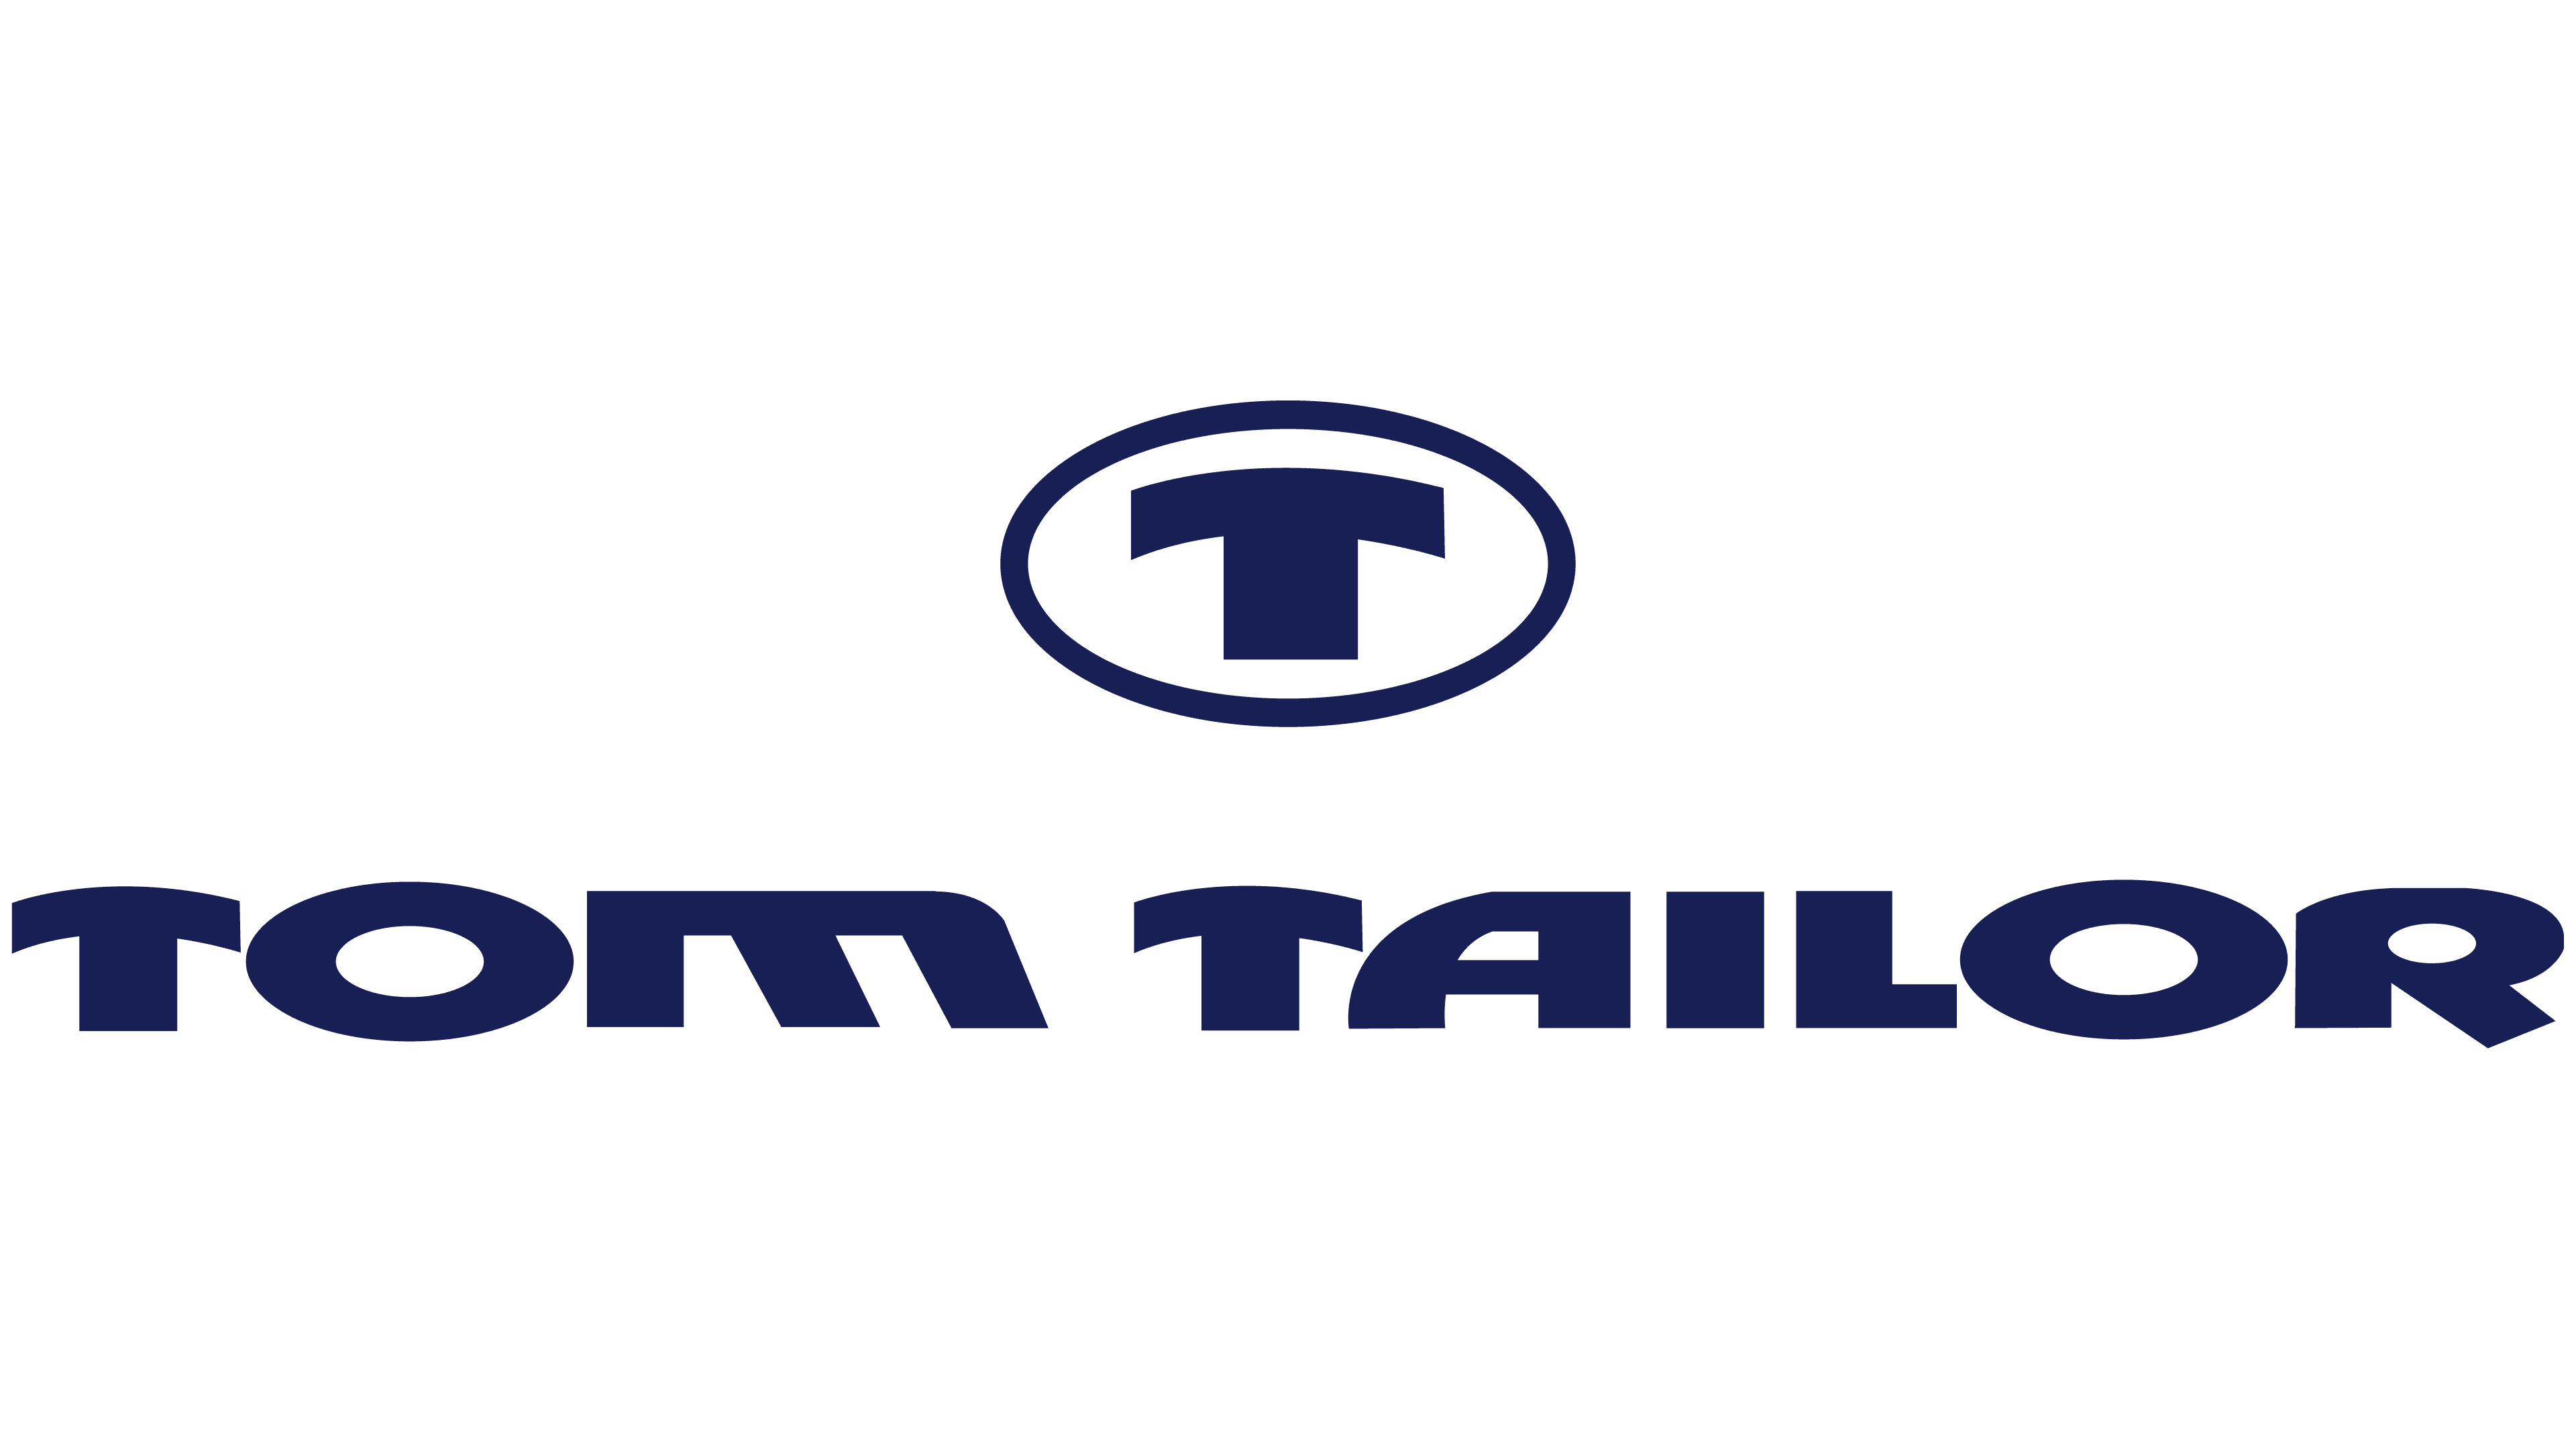 brand history, PNG, symbol, meaning, and Logo Tom Tailor